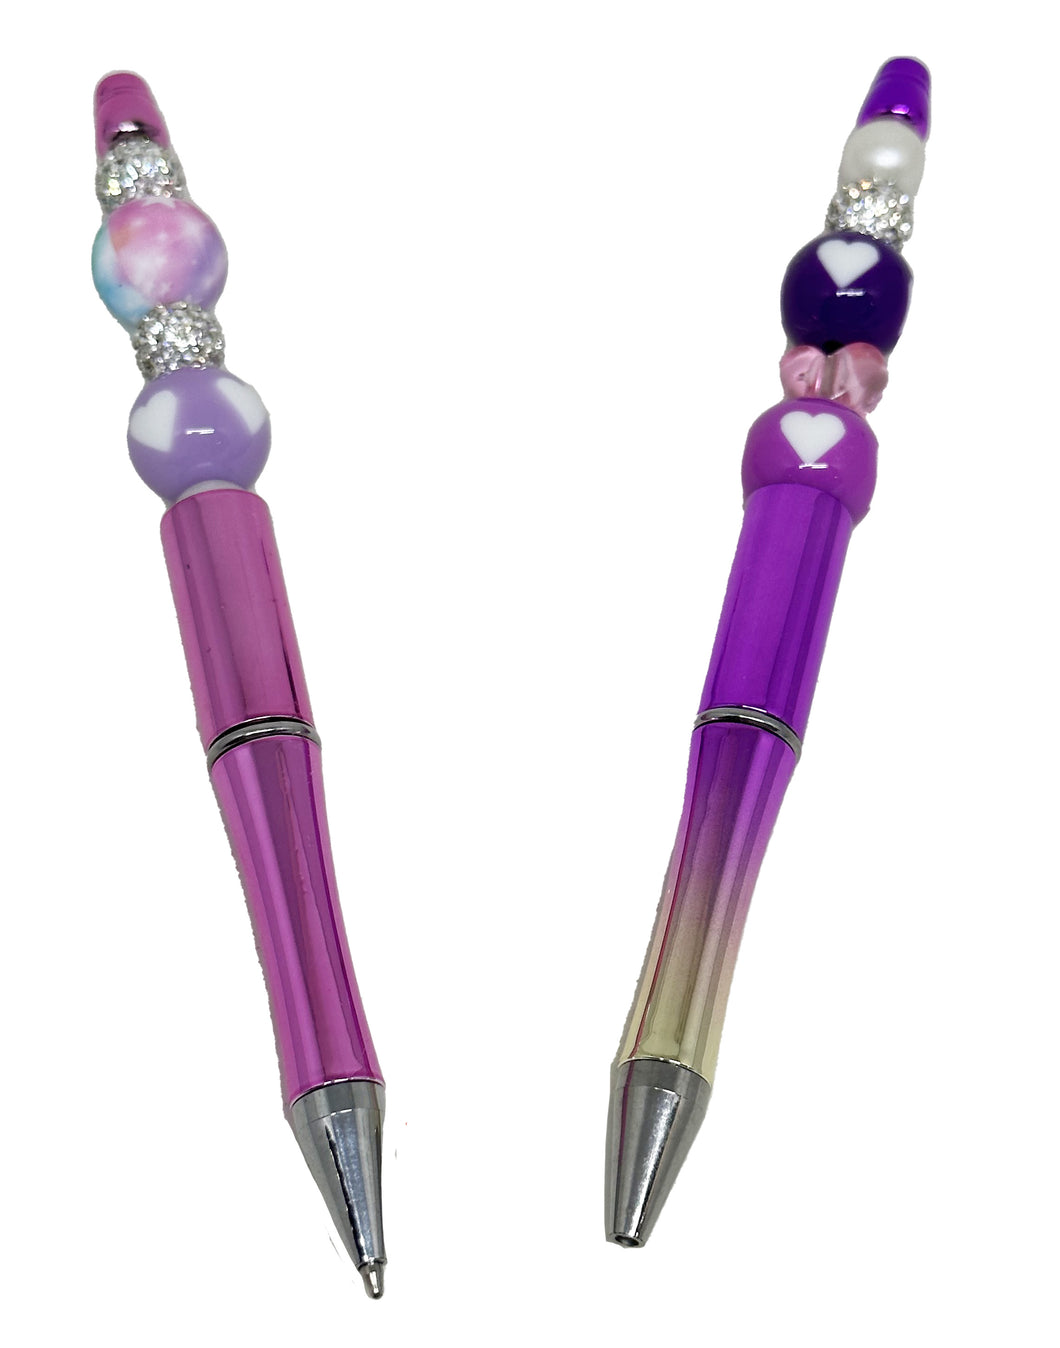 Pink or purple jewel ballpoint pen with black ink with pearls and pocket